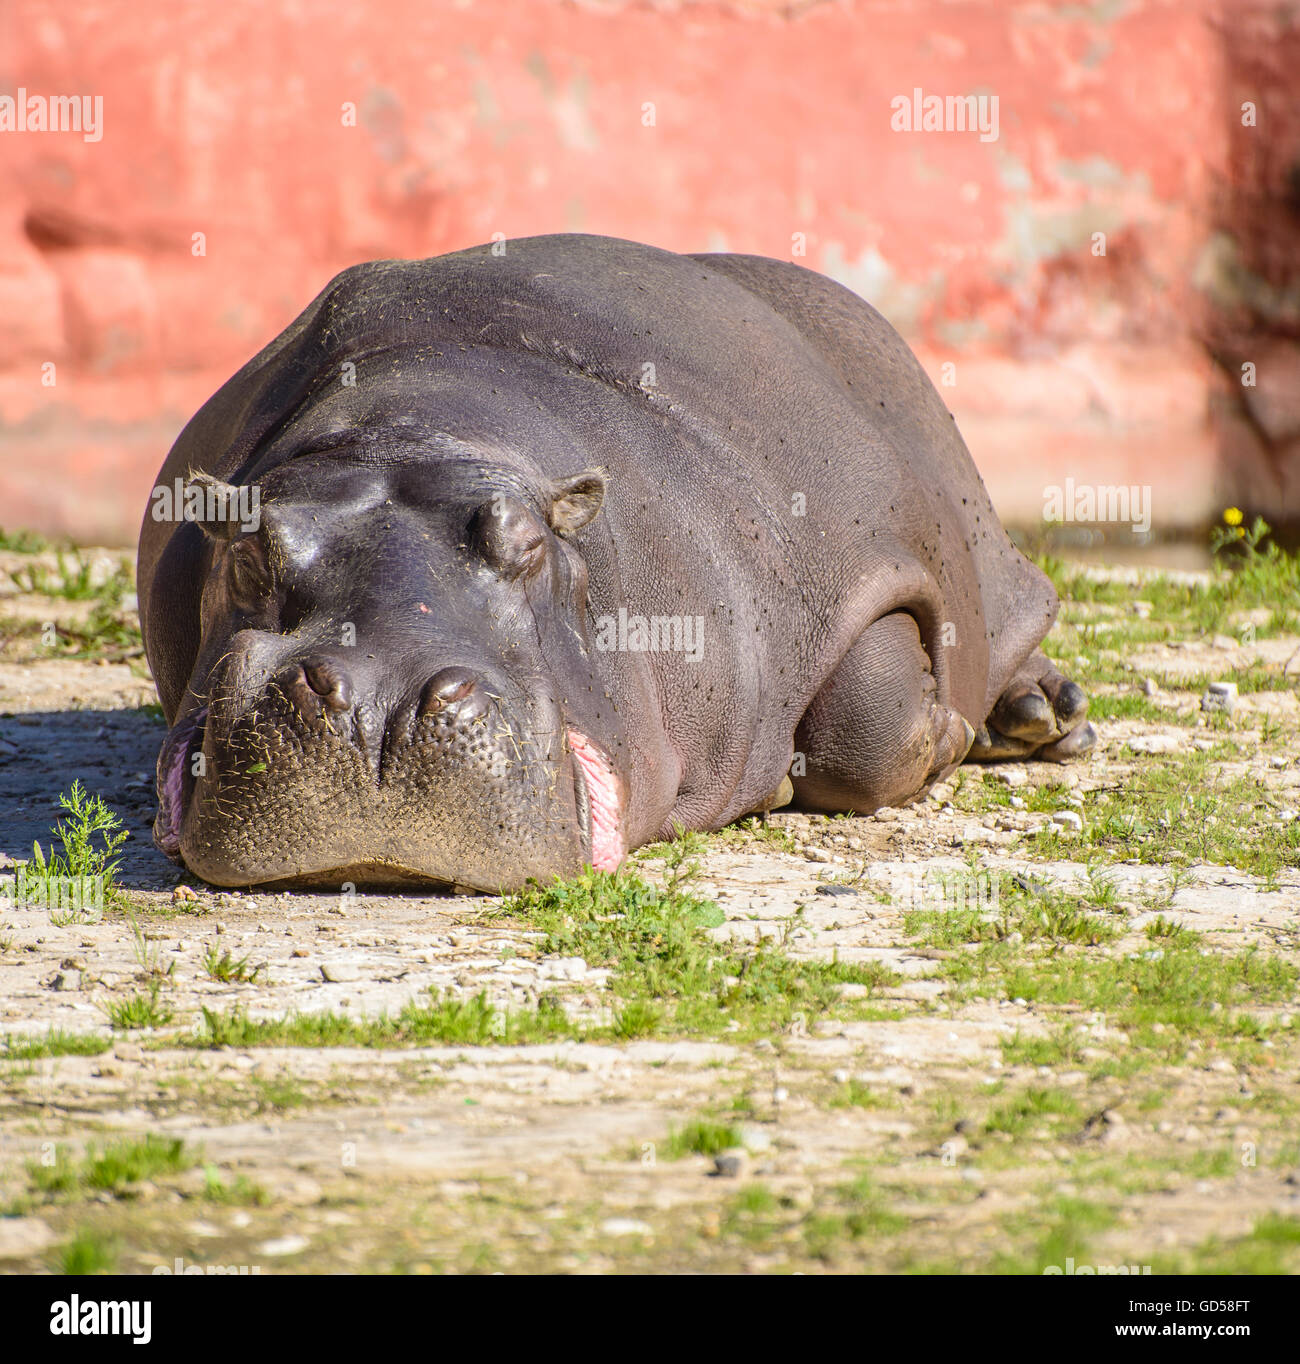 A Large Zoo Hippo Resting Under Sunlight Stock Photo